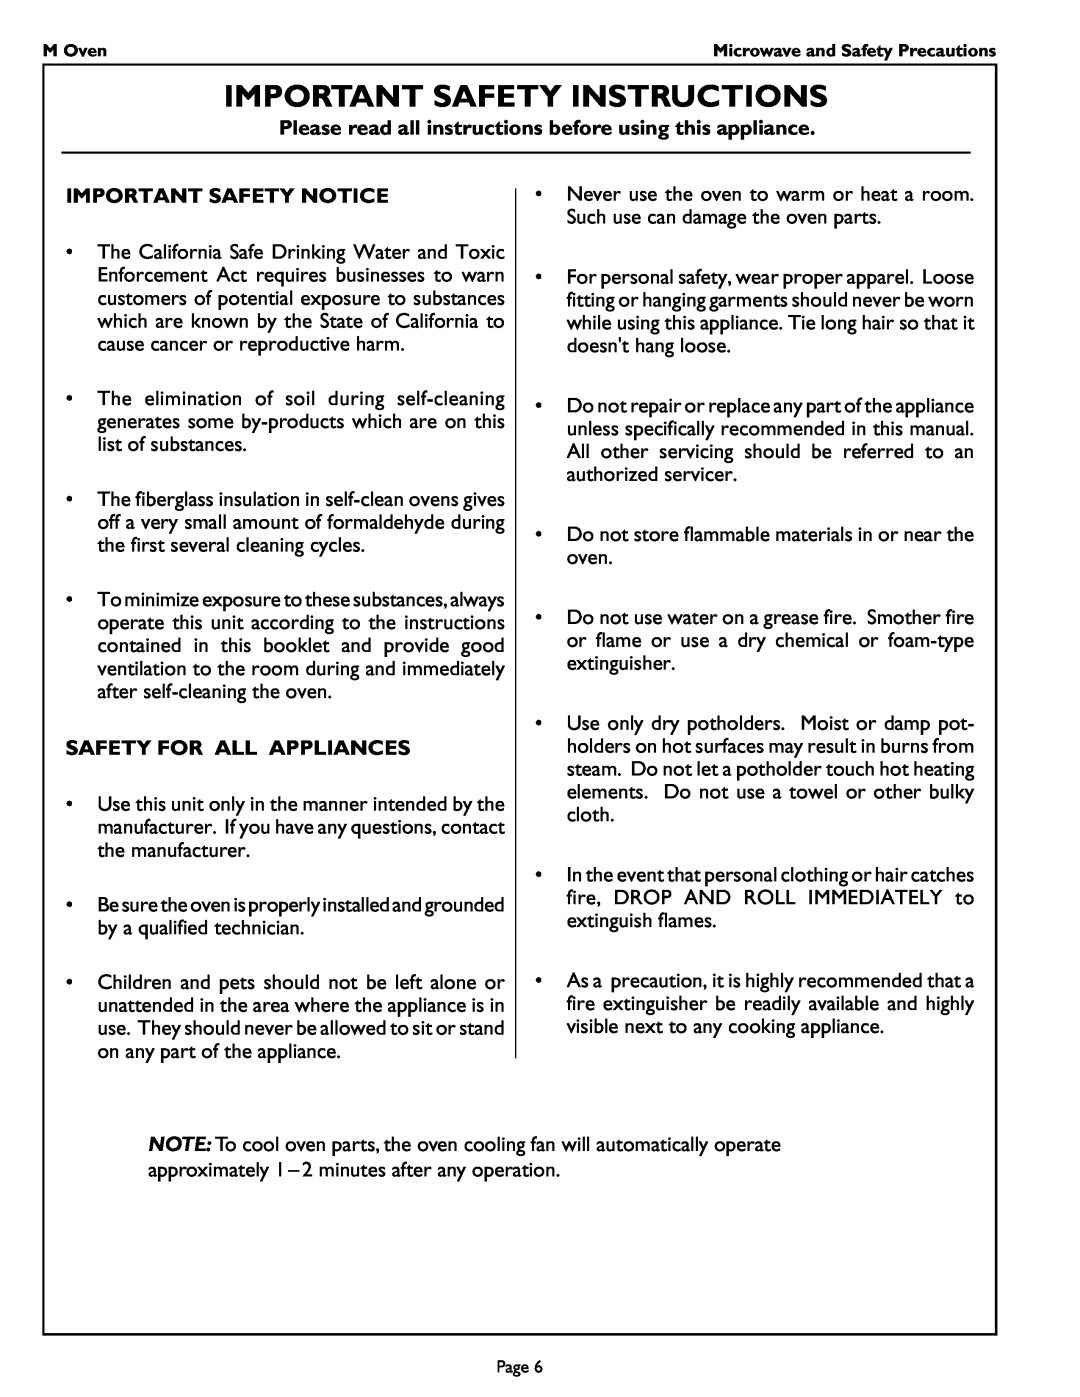 Thermador MT27 manual Important Safety Instructions, Please read all instructions before using this appliance 